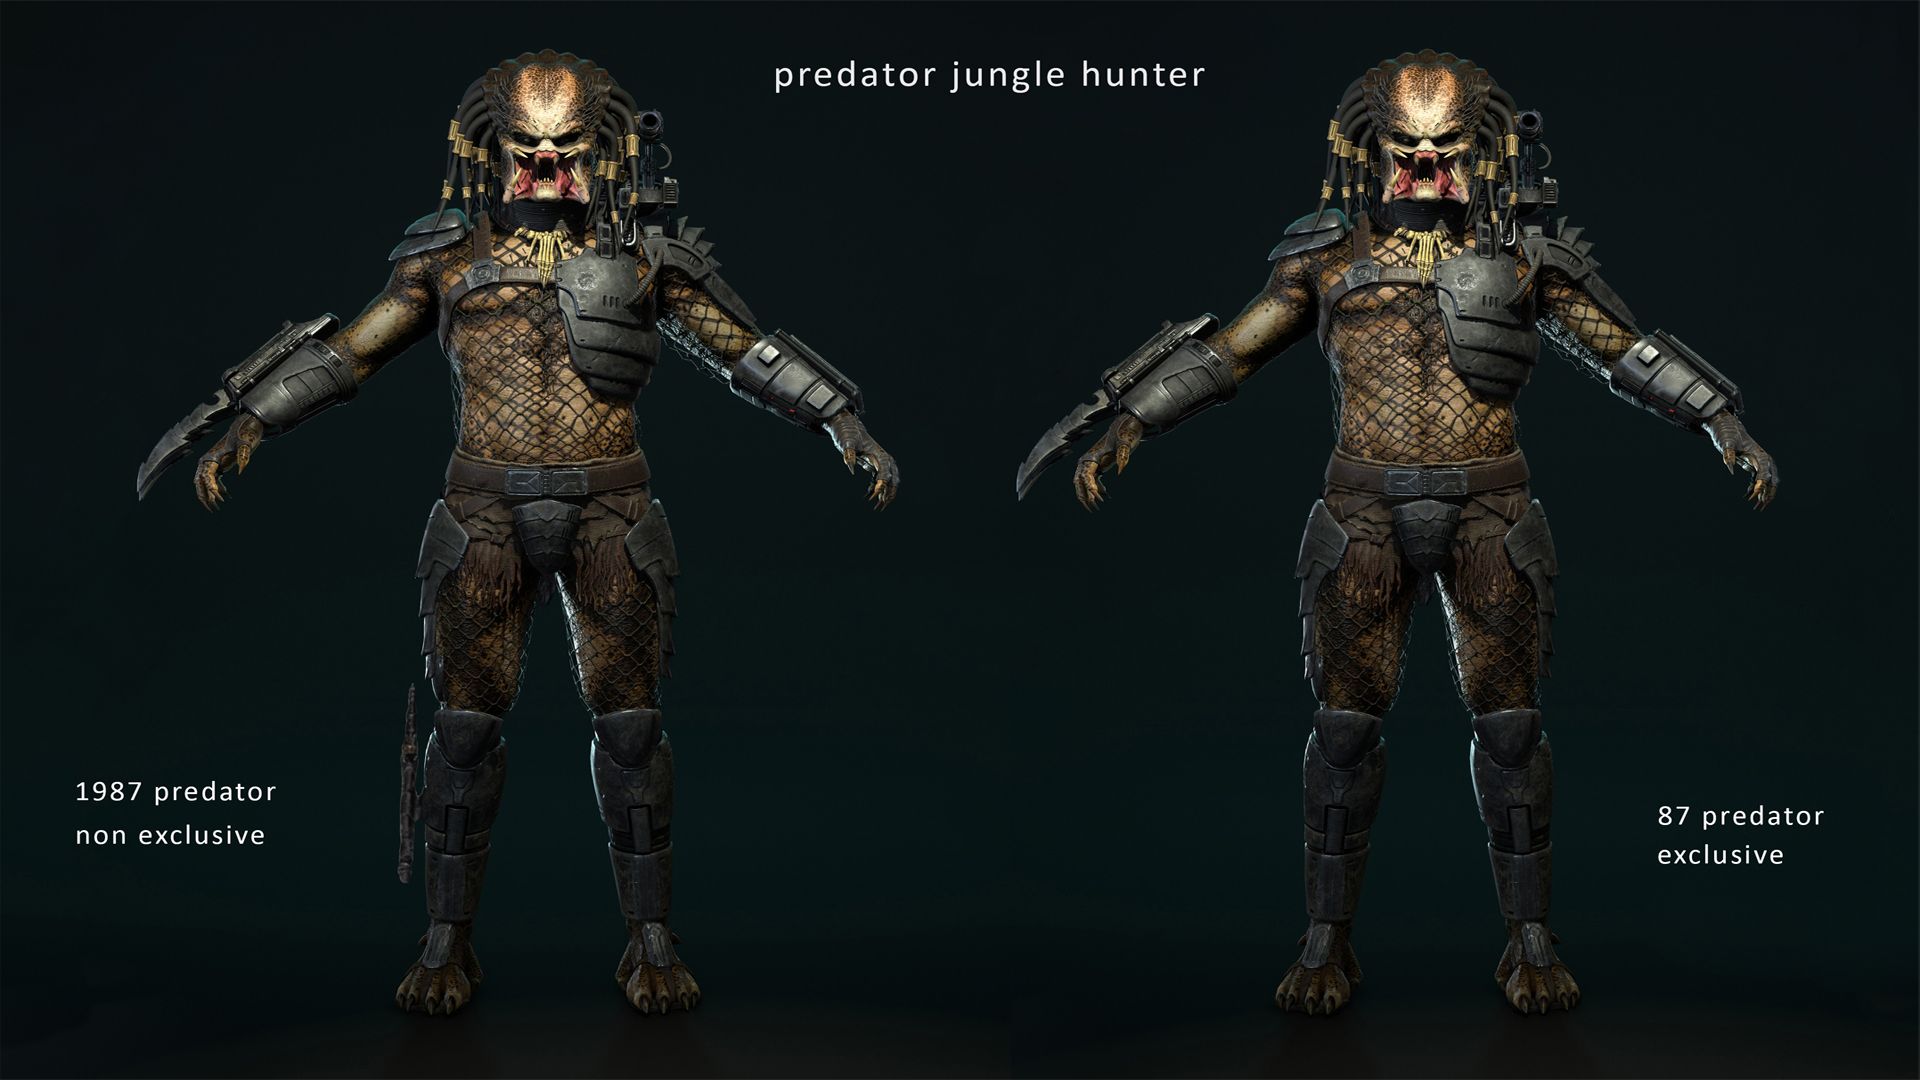 lot of difference between 87 and 1987 jungle hunter.l et's get into Discussion: Hunting Grounds